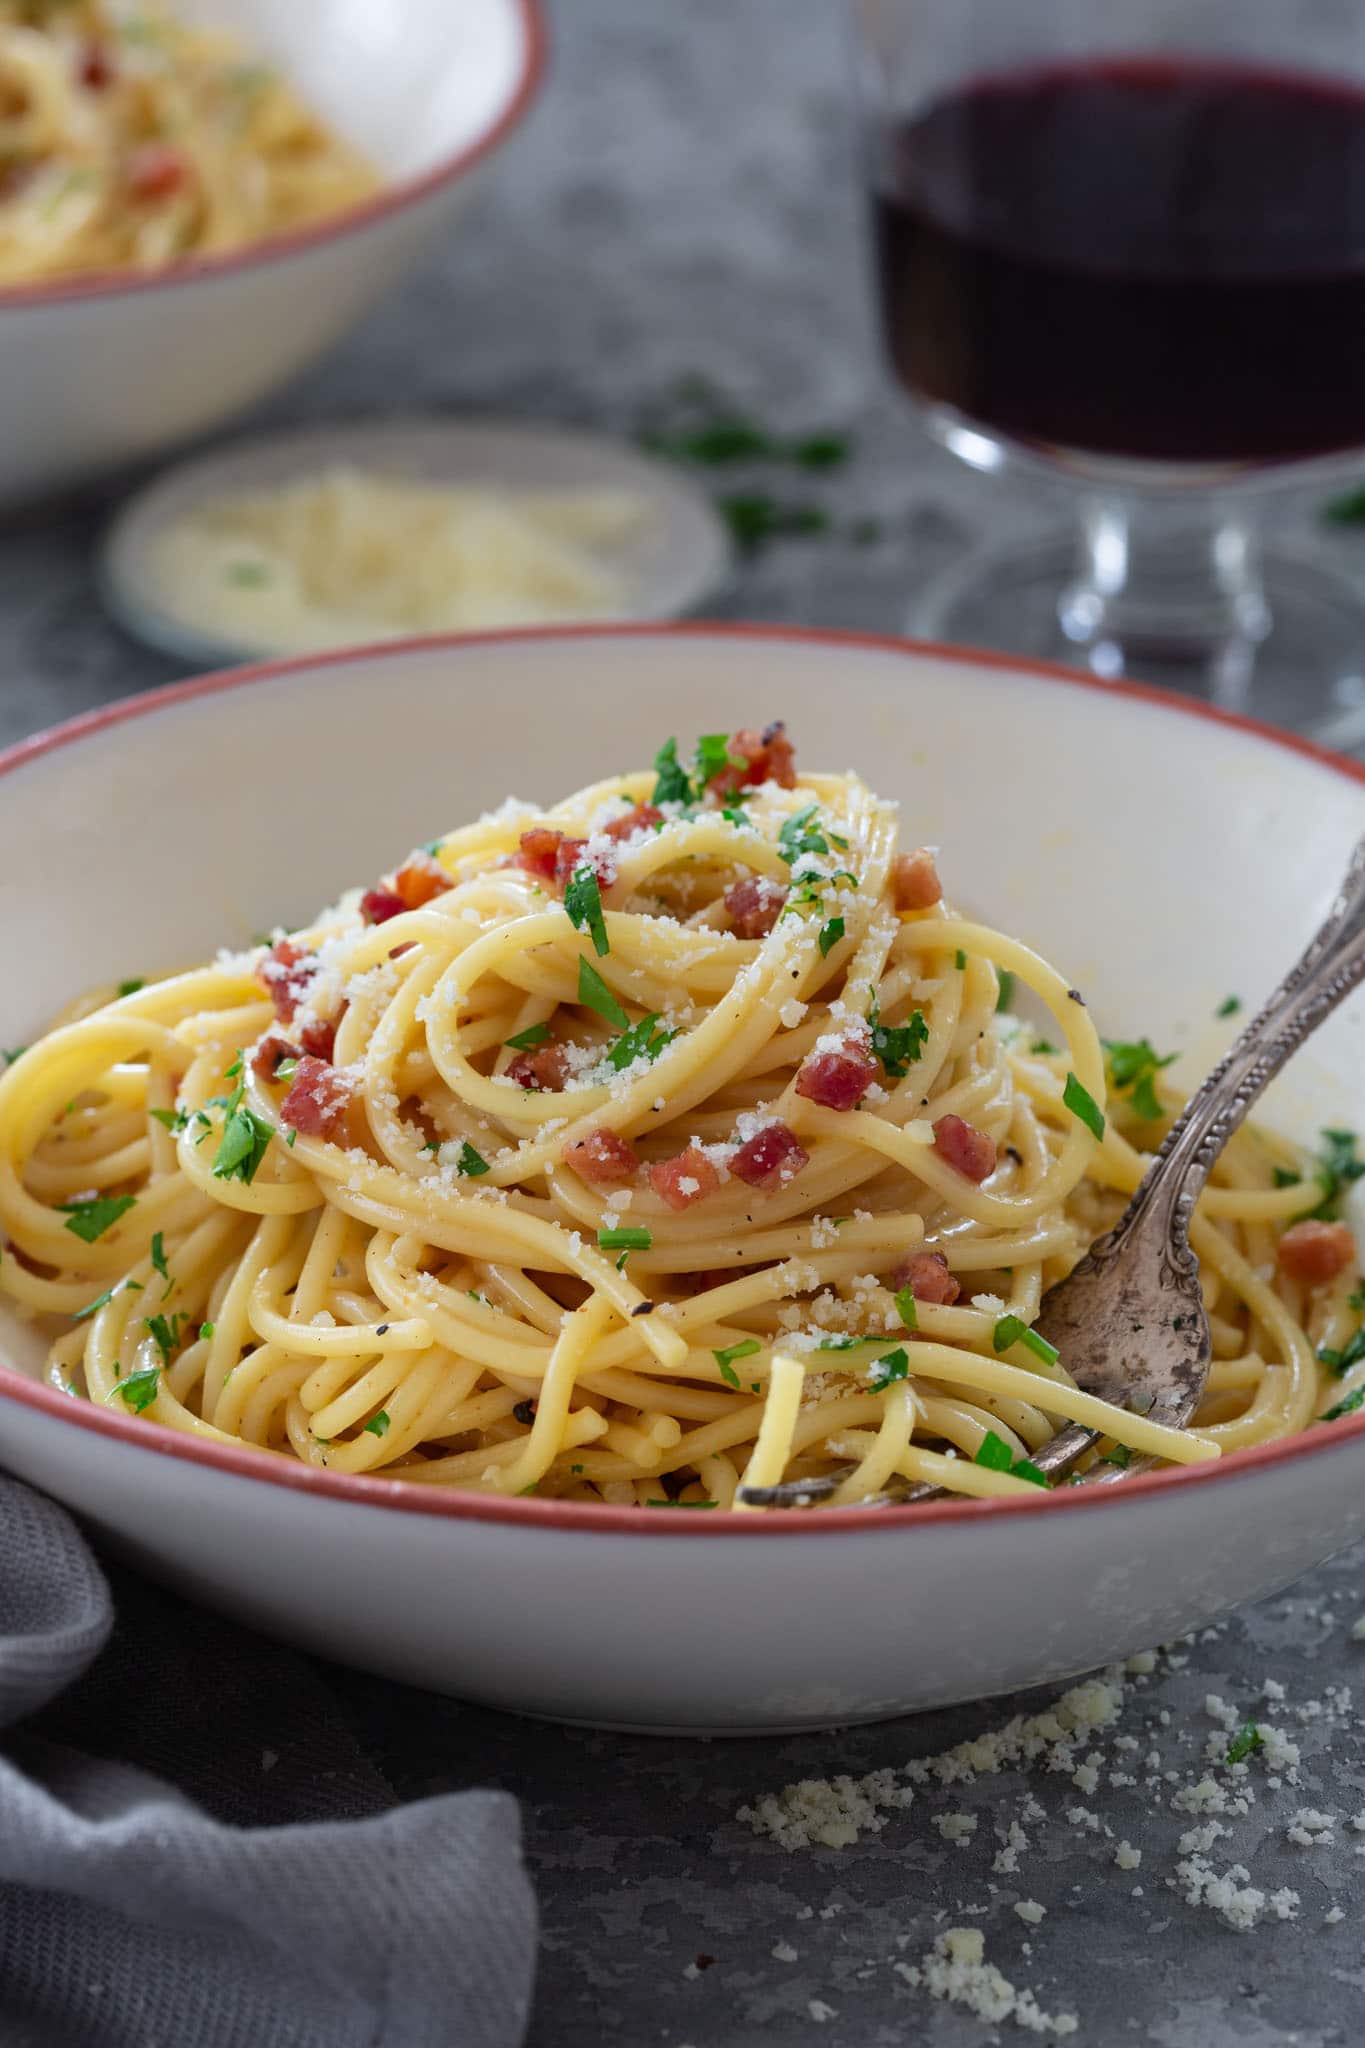 A bowl of Spaghetti Carbonara garnished with parsley and grated Parmesan cheese.